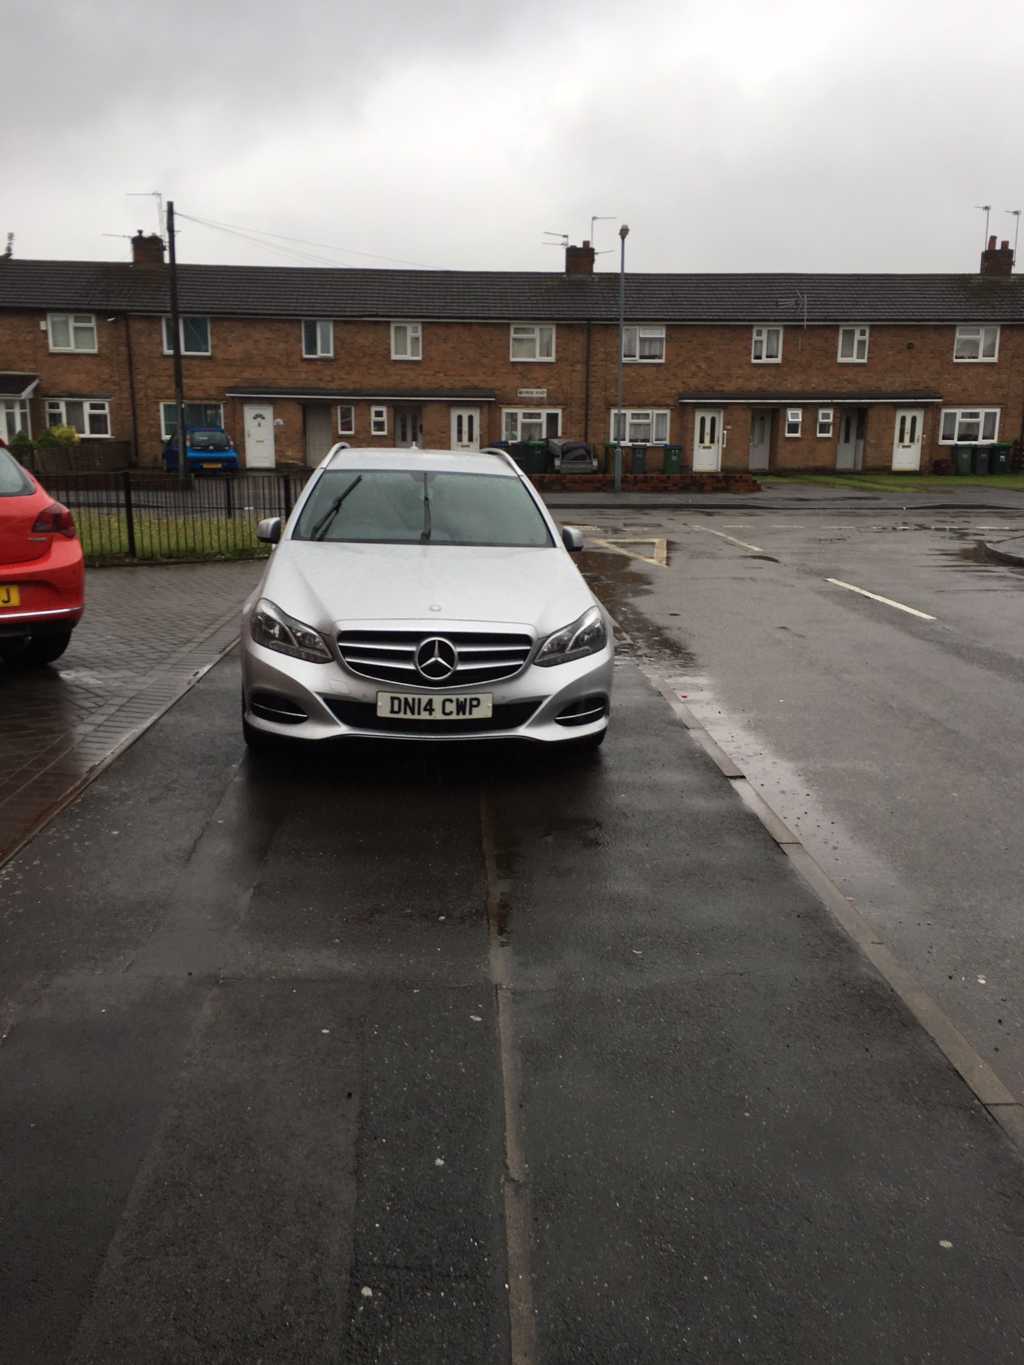 DN14 CWP displaying Inconsiderate Parking